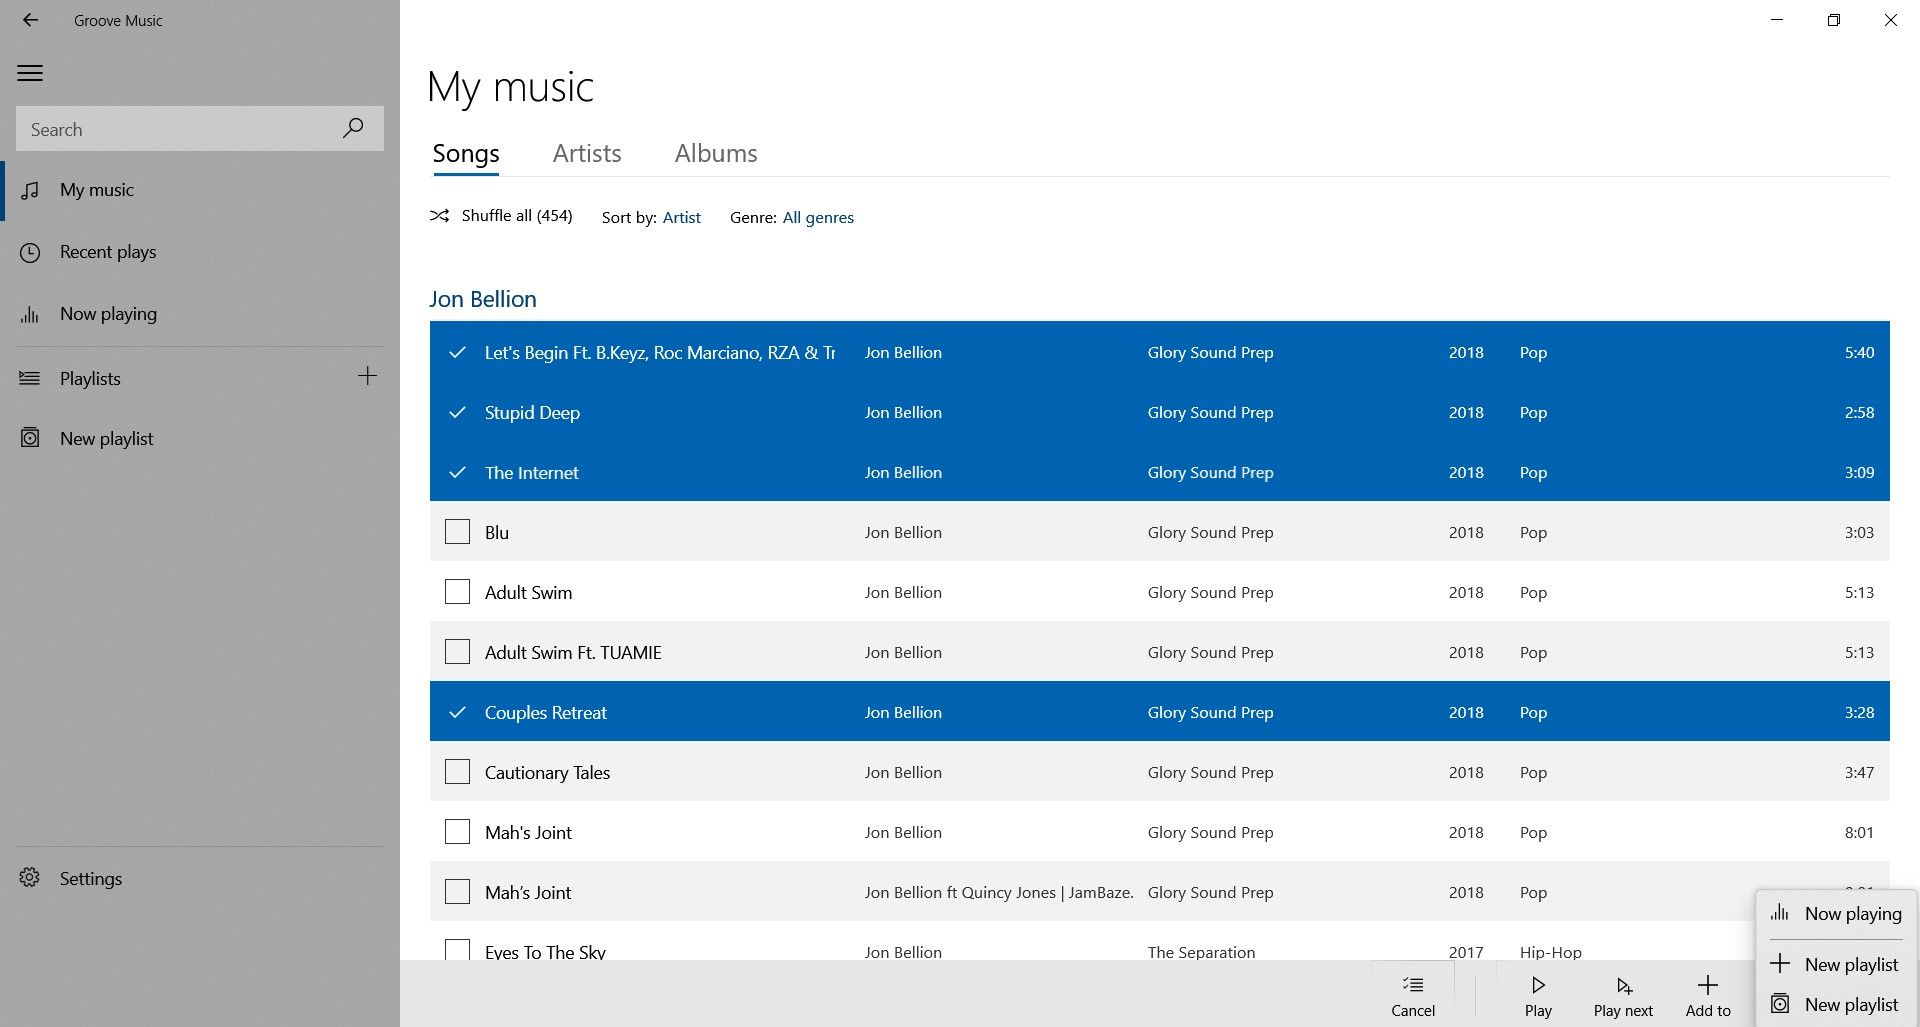 Adding a song to a playlist on groove music